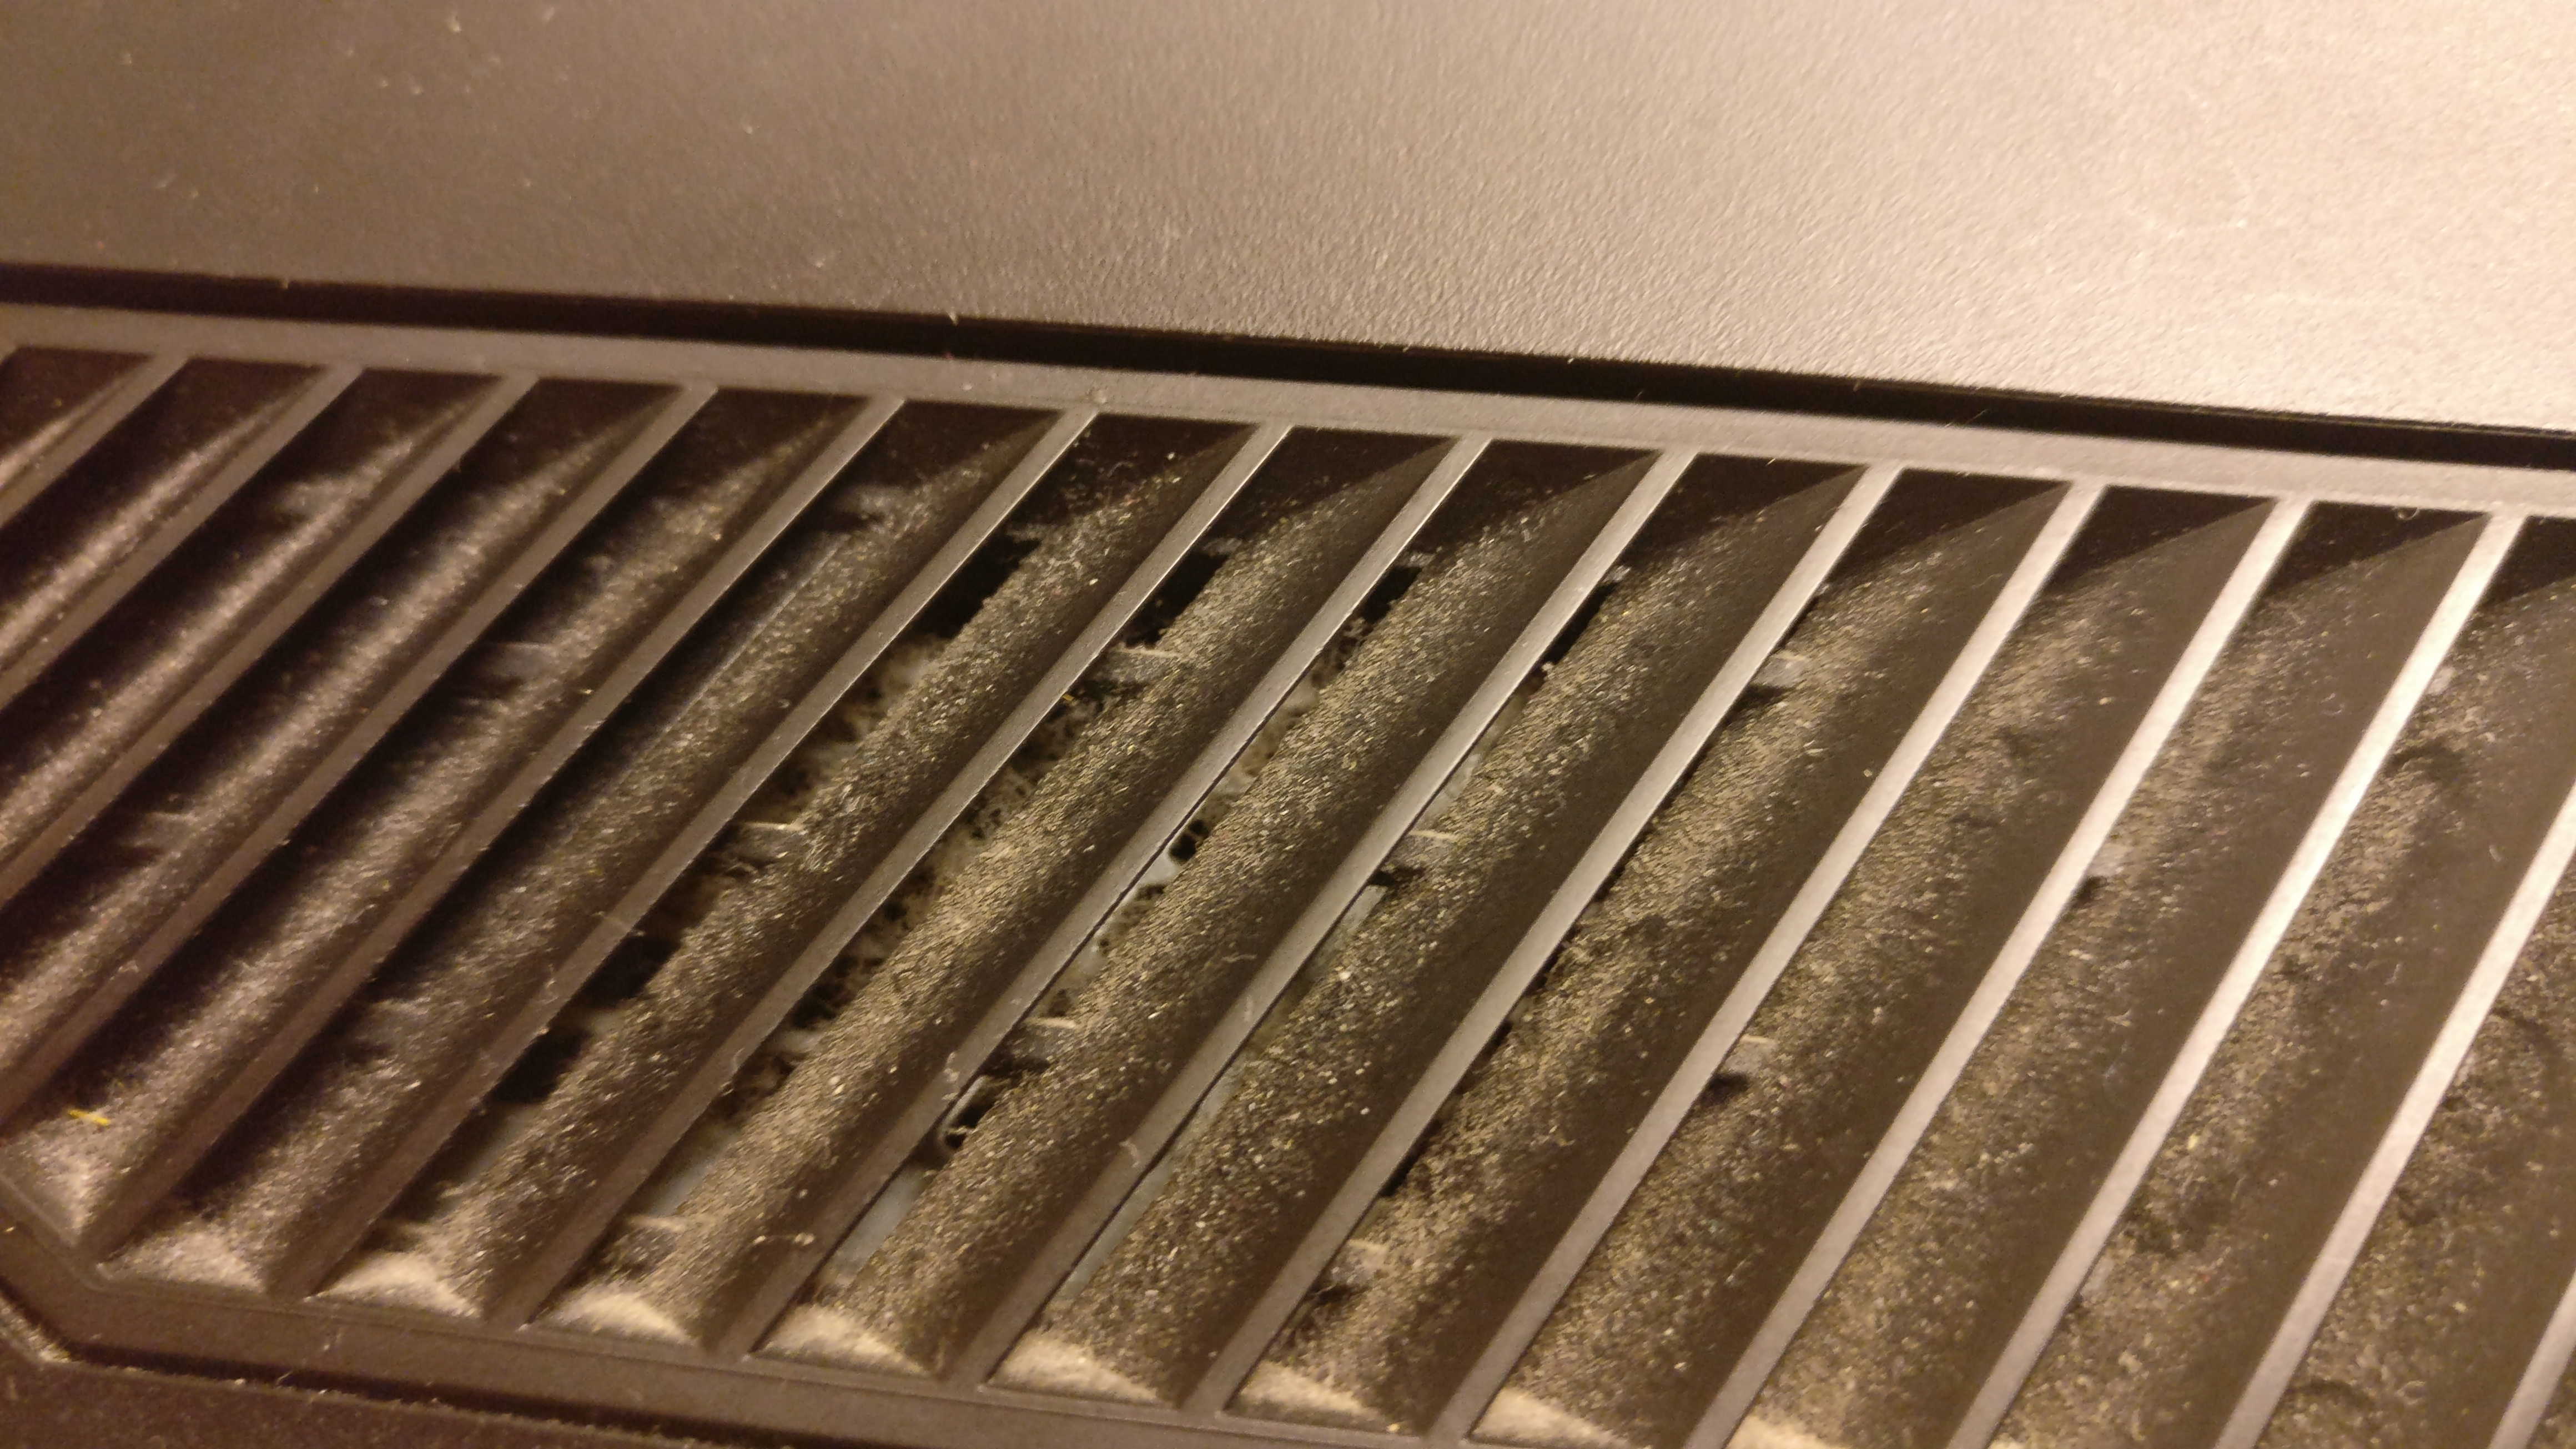 Dust Build up can cause Overheating.